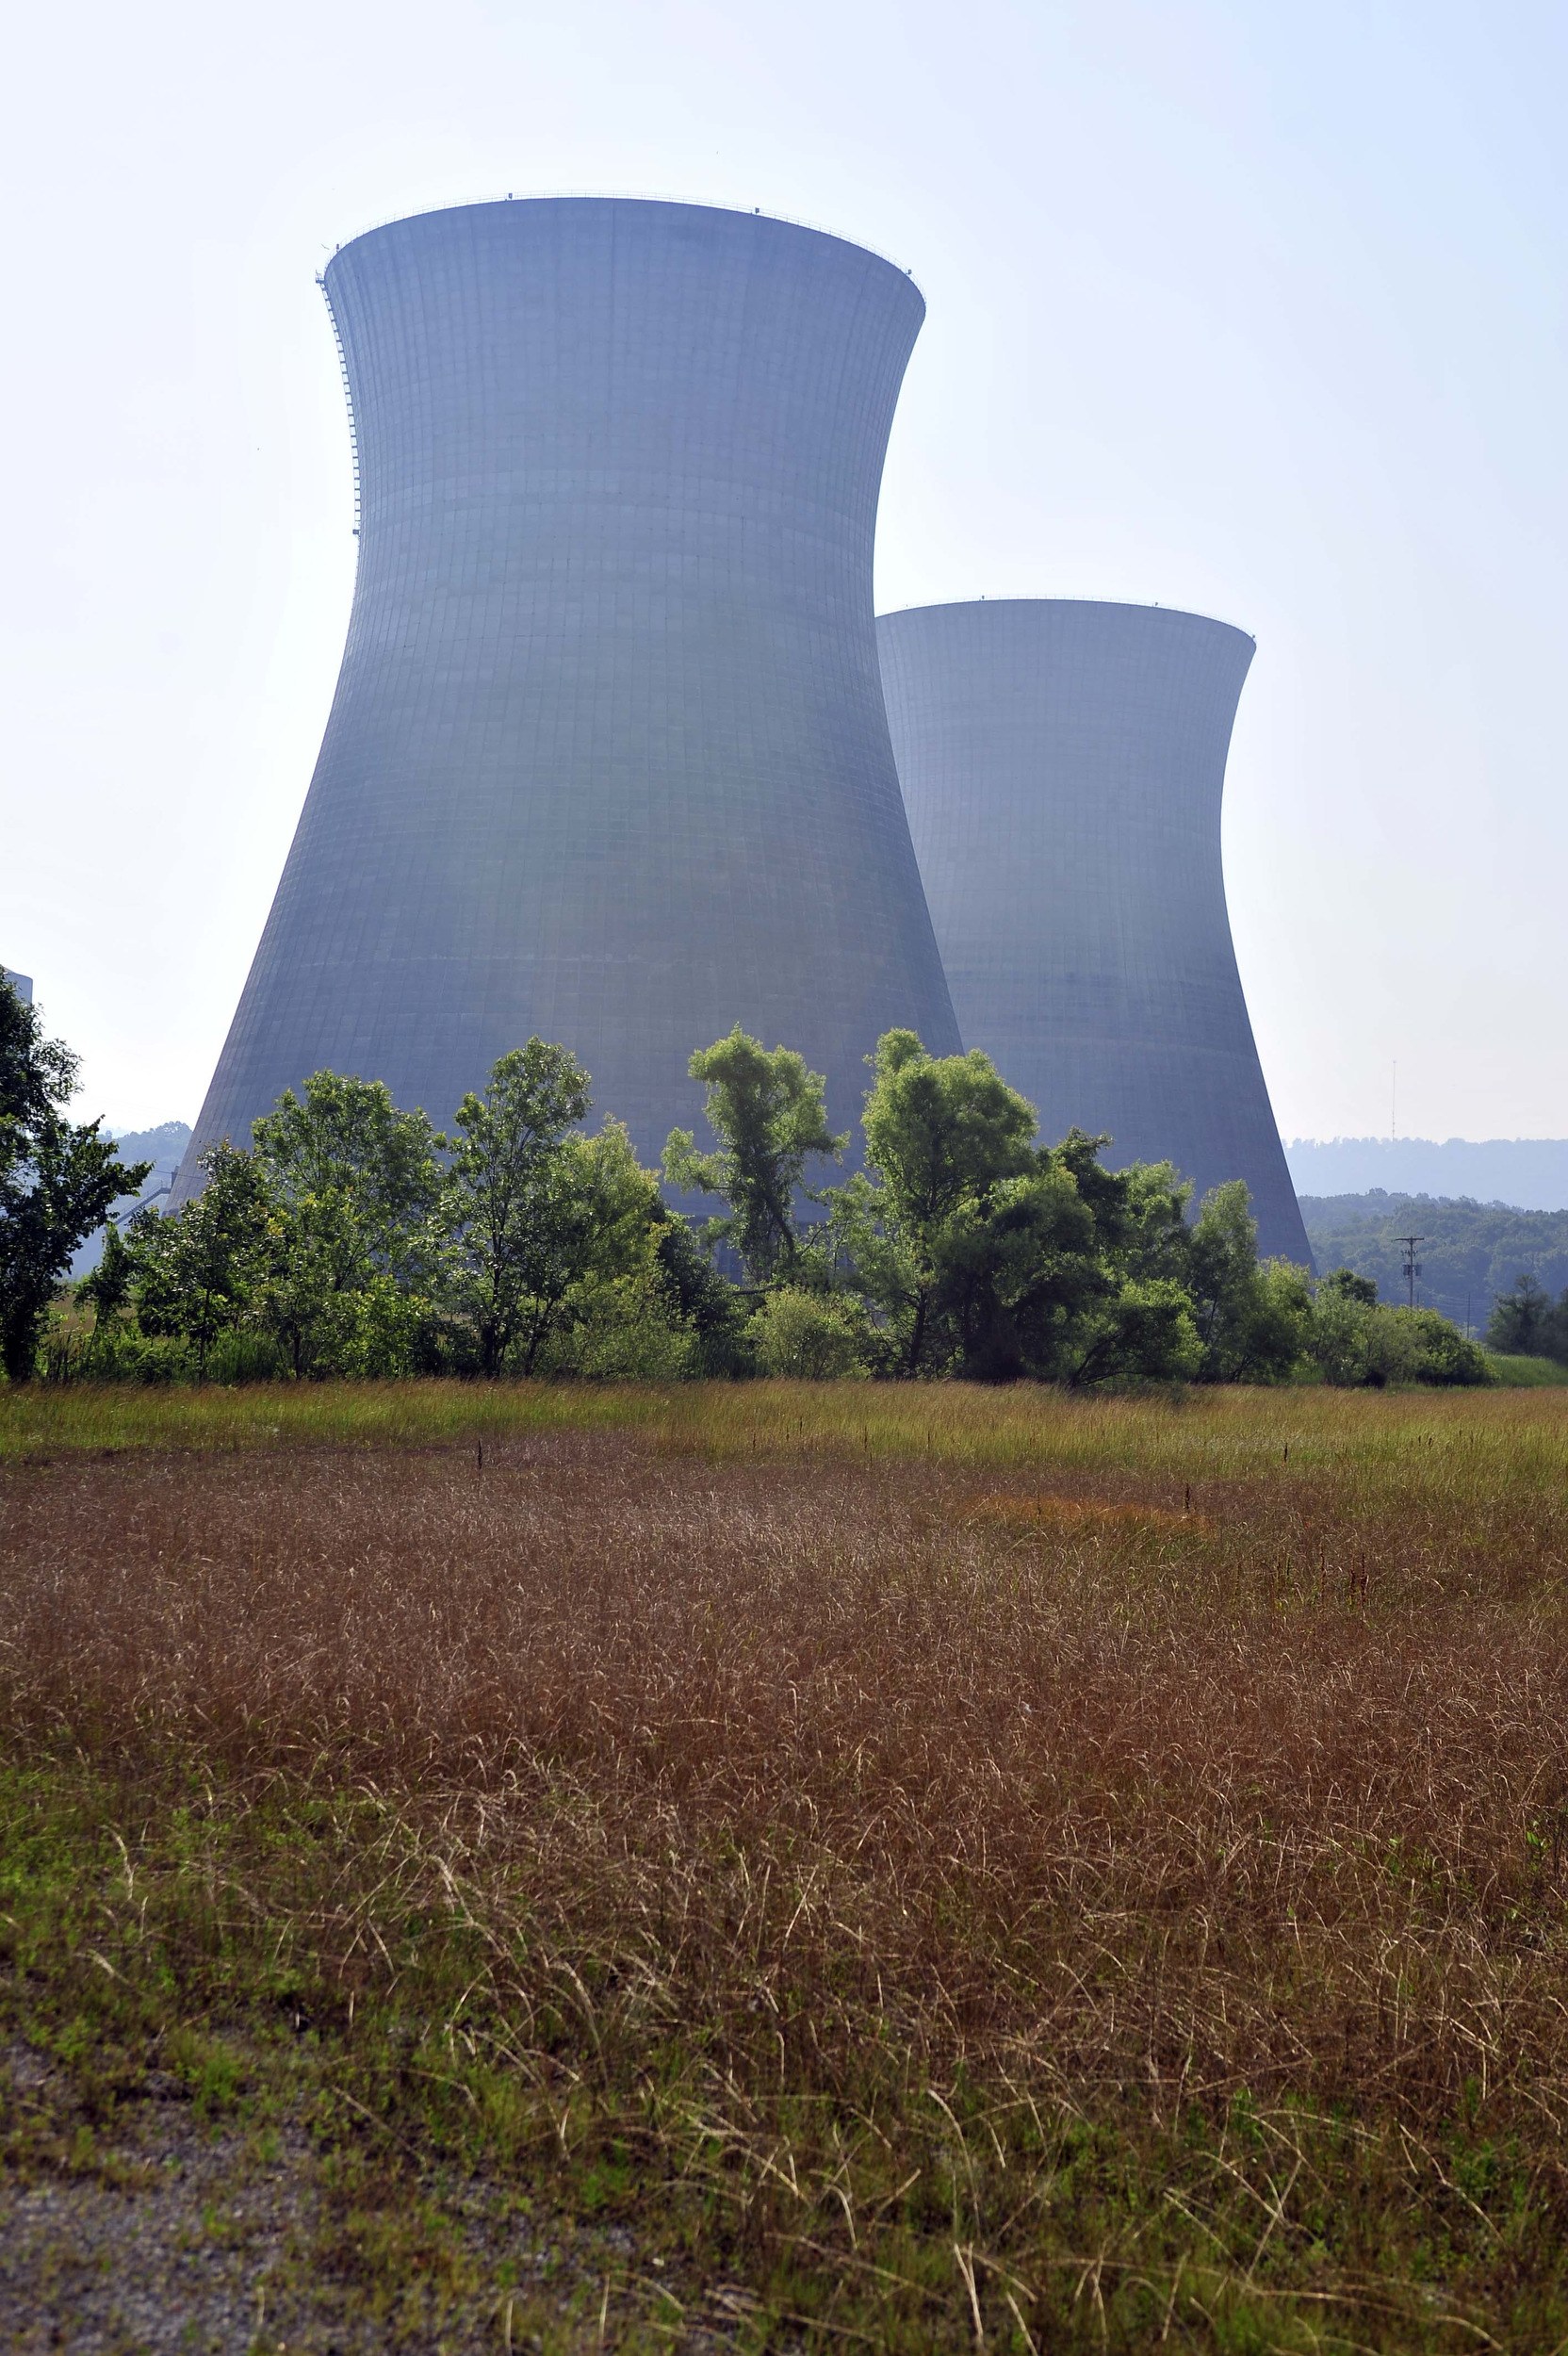  The cooling towers at the non-operational Bellefonte Nuclear Power Plant June 2, 2011 in rural Hollywood, Alabama. 